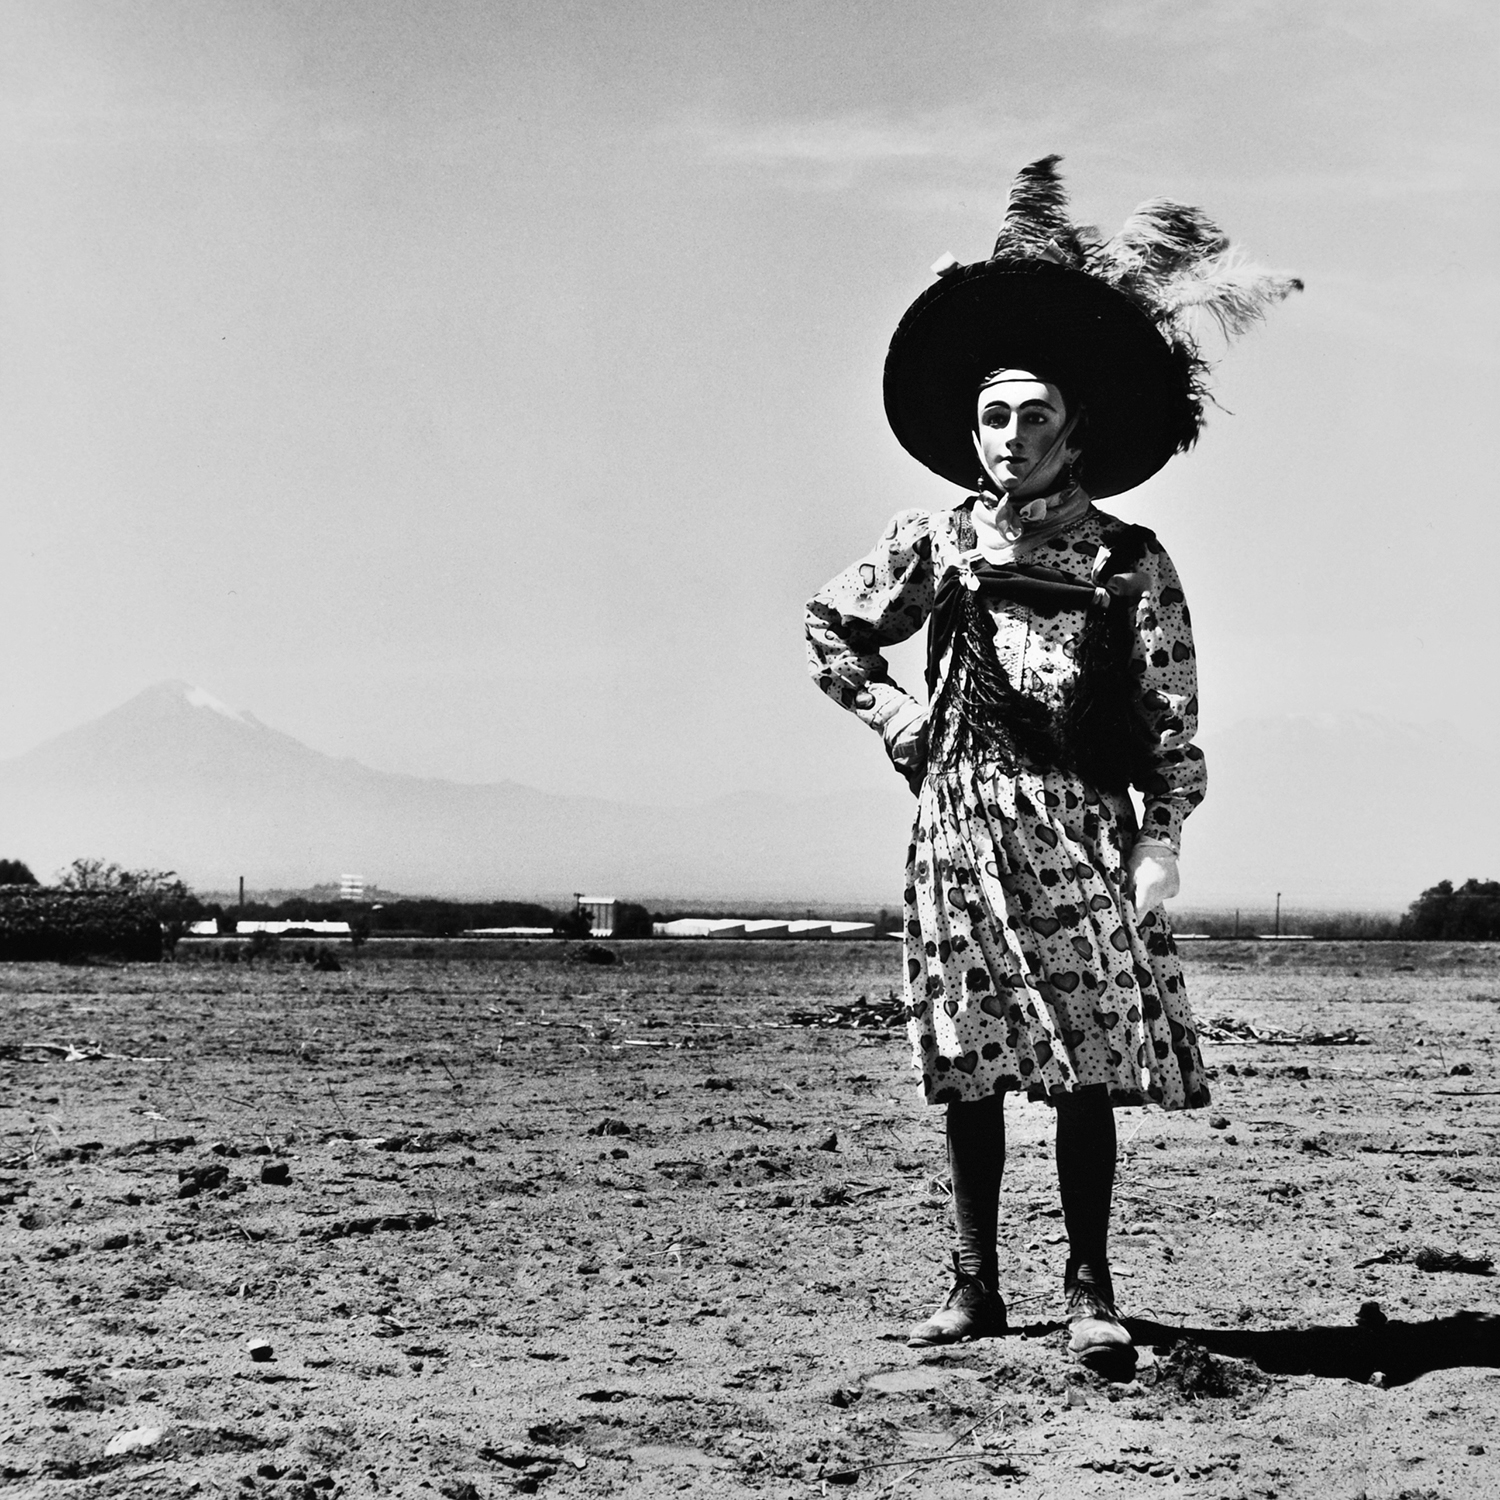 Graciela Iturbide, Carnaval, Tlaxcala, Mexico, 1974  © the artist and courtesy ROSEGALLERY